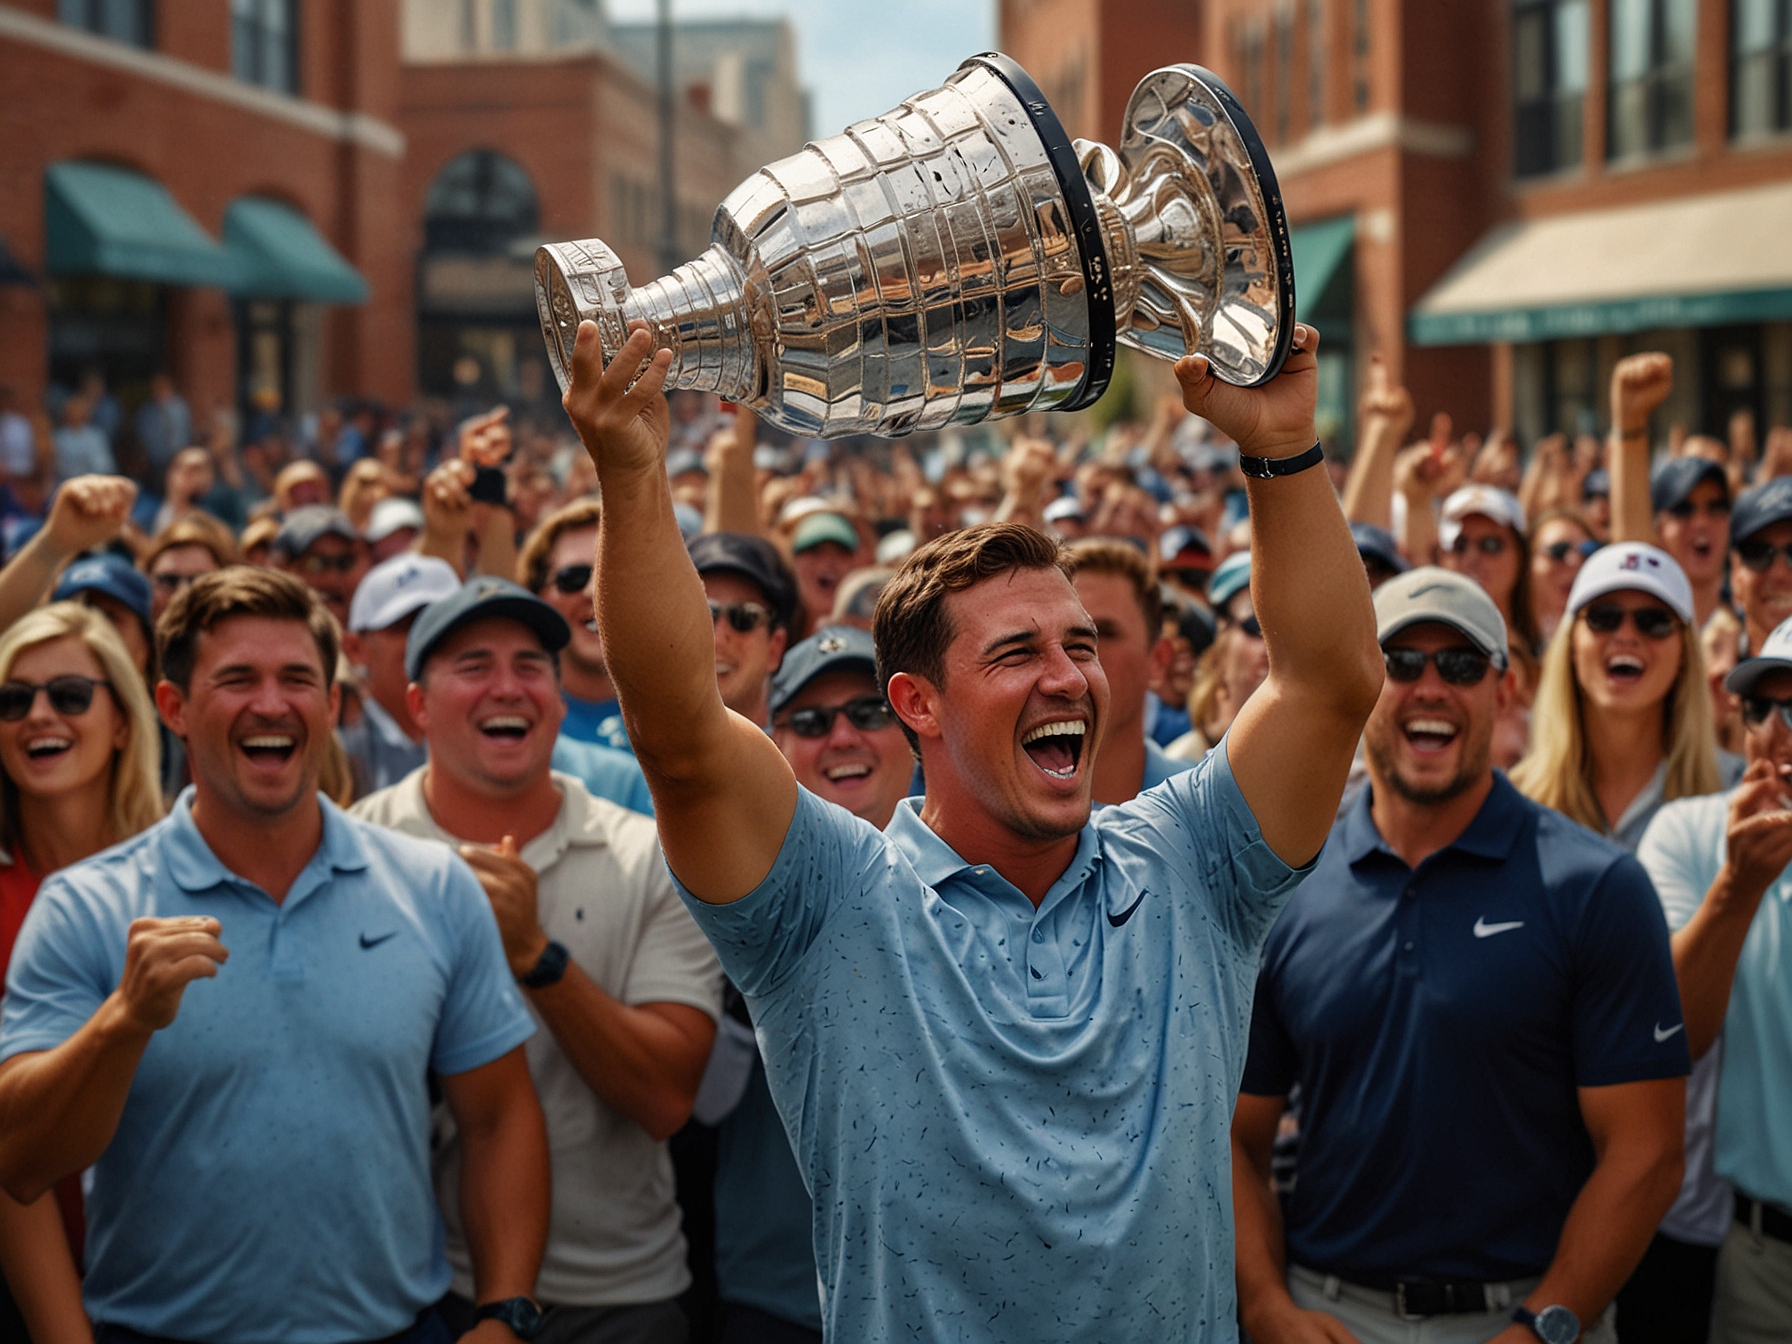 Brooks Koepka, in high spirits, hoisting the Stanley Cup amidst a crowd of jubilant fans, showcasing his elation and the sweeping excitement of the historic win.